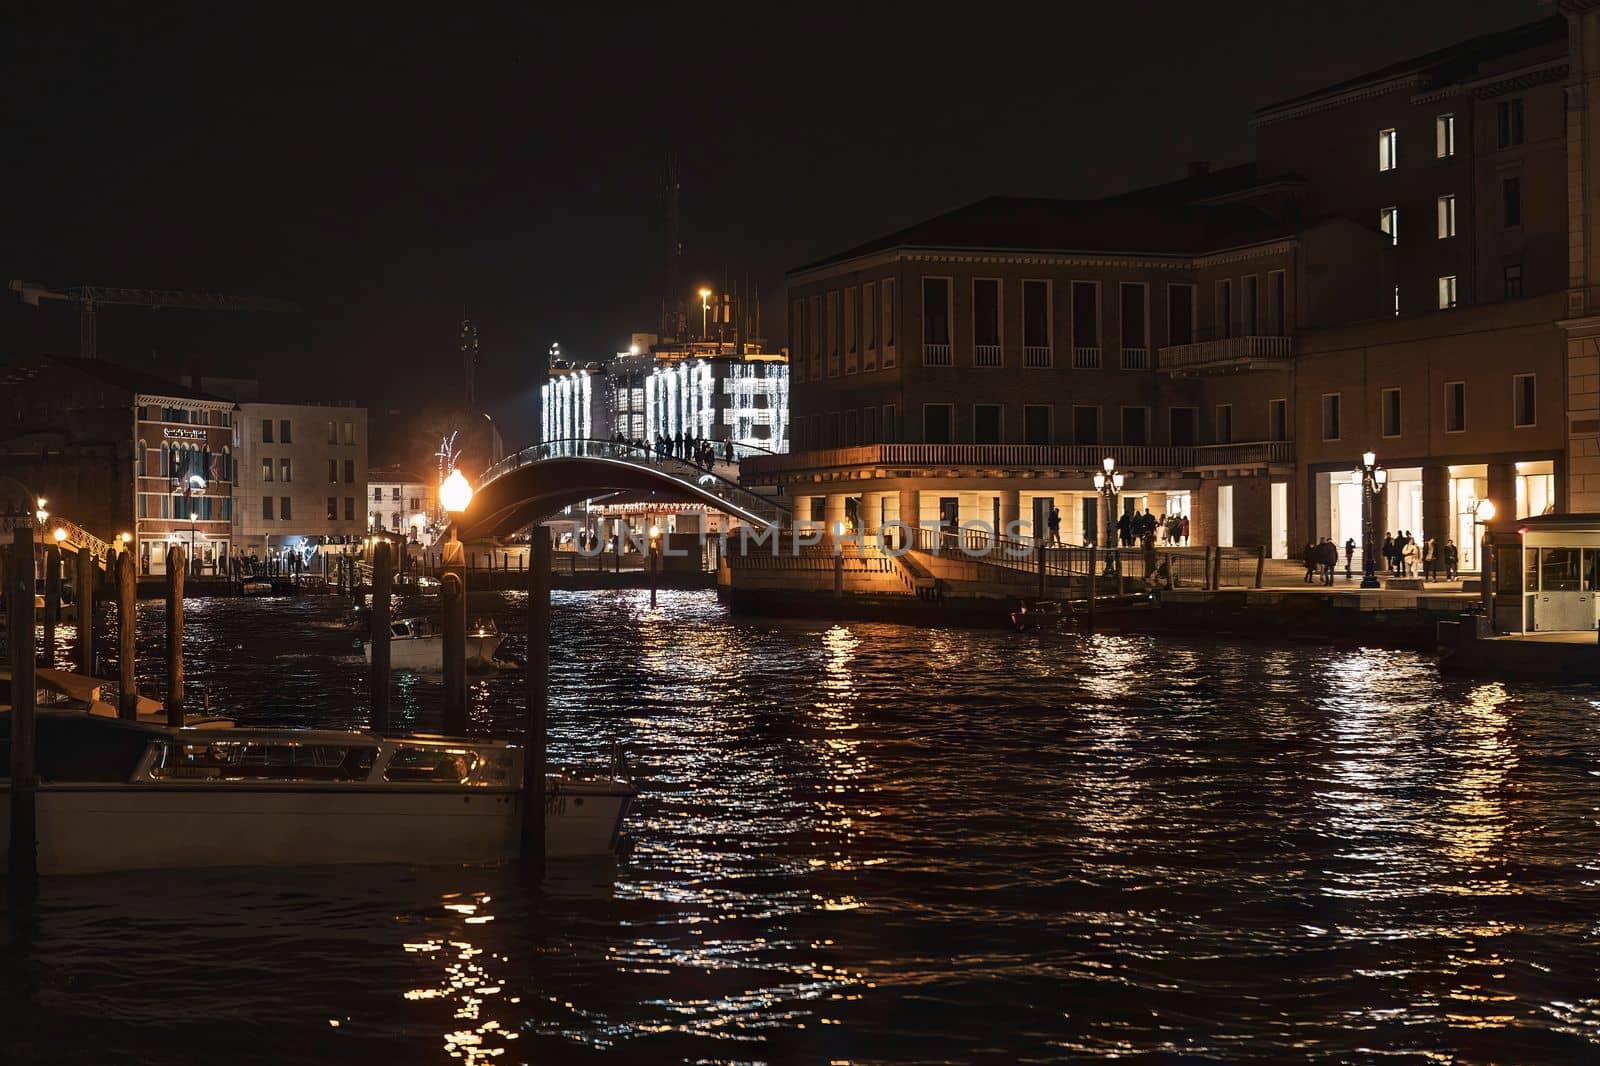 Venice landscape at dusk and night time scene